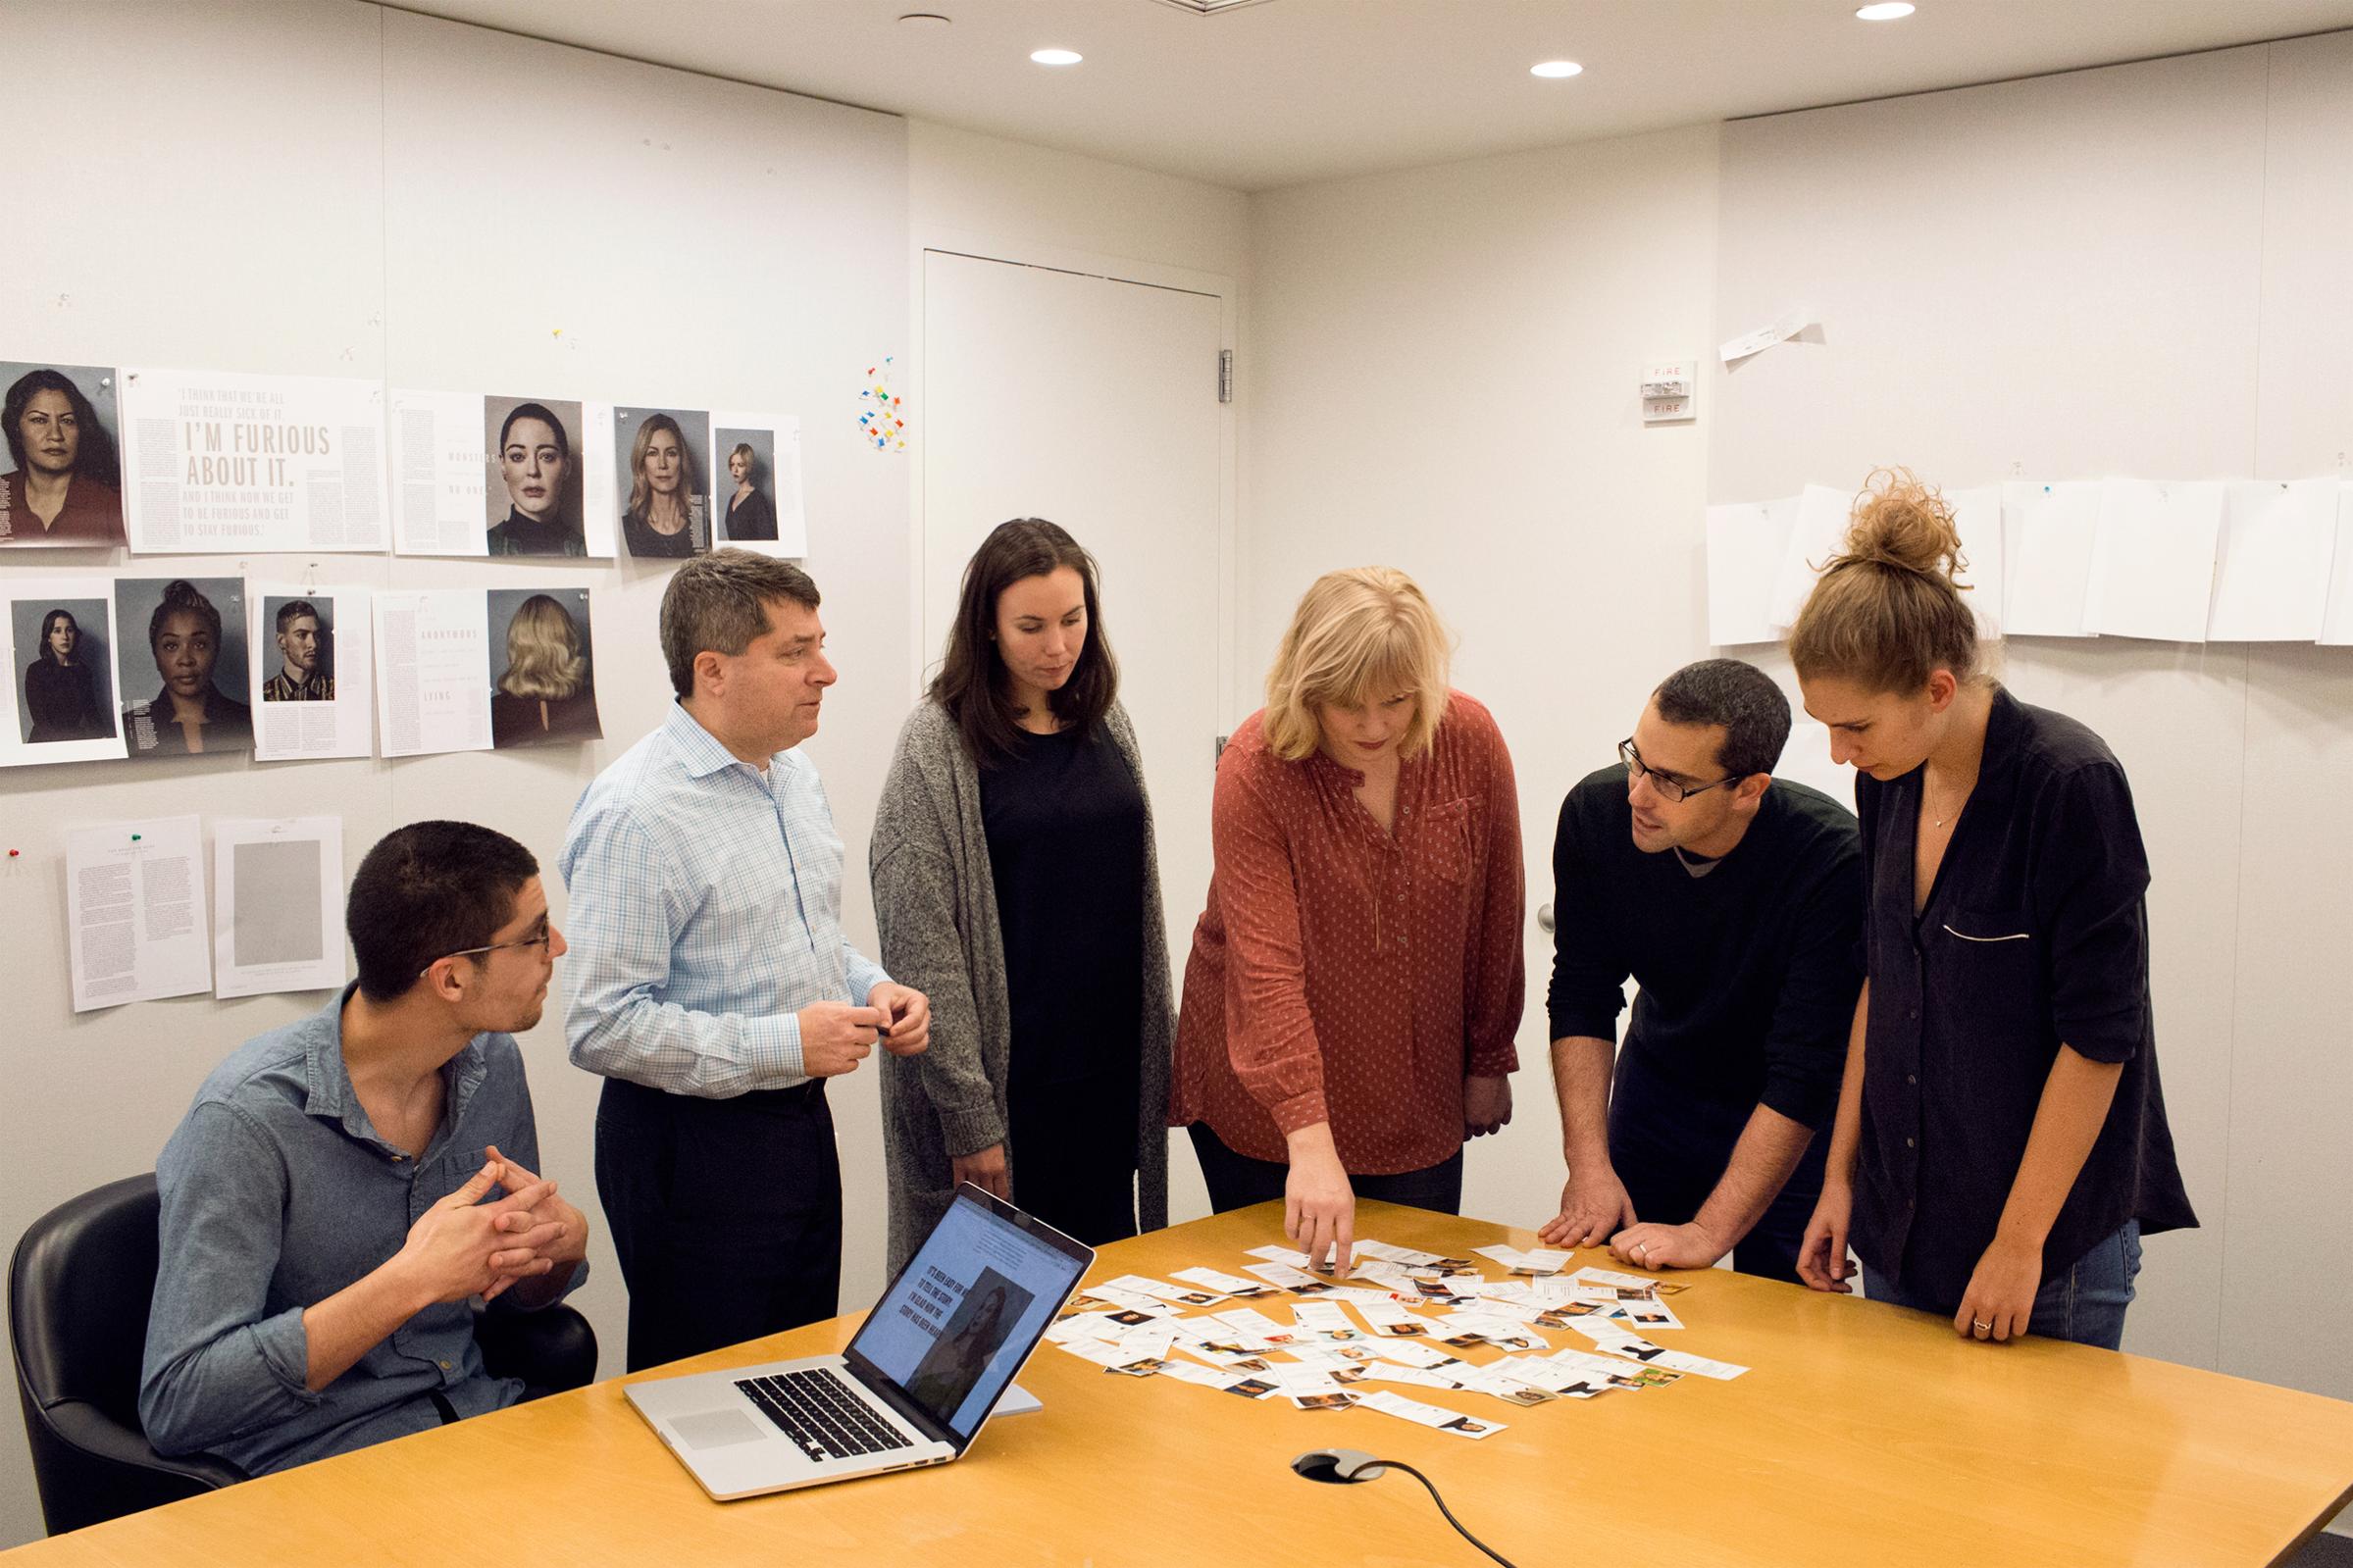 From left: senior engineer David Kofahl, editor-in-chief Edward Felsenthal, senior producer Tara Johnson, associate art director Chelsea Kardokus, assistant managing editor Ben Goldberger and writer Eliana Dockterman outlining the package in their second home, a secret conference room called “the bunker.”